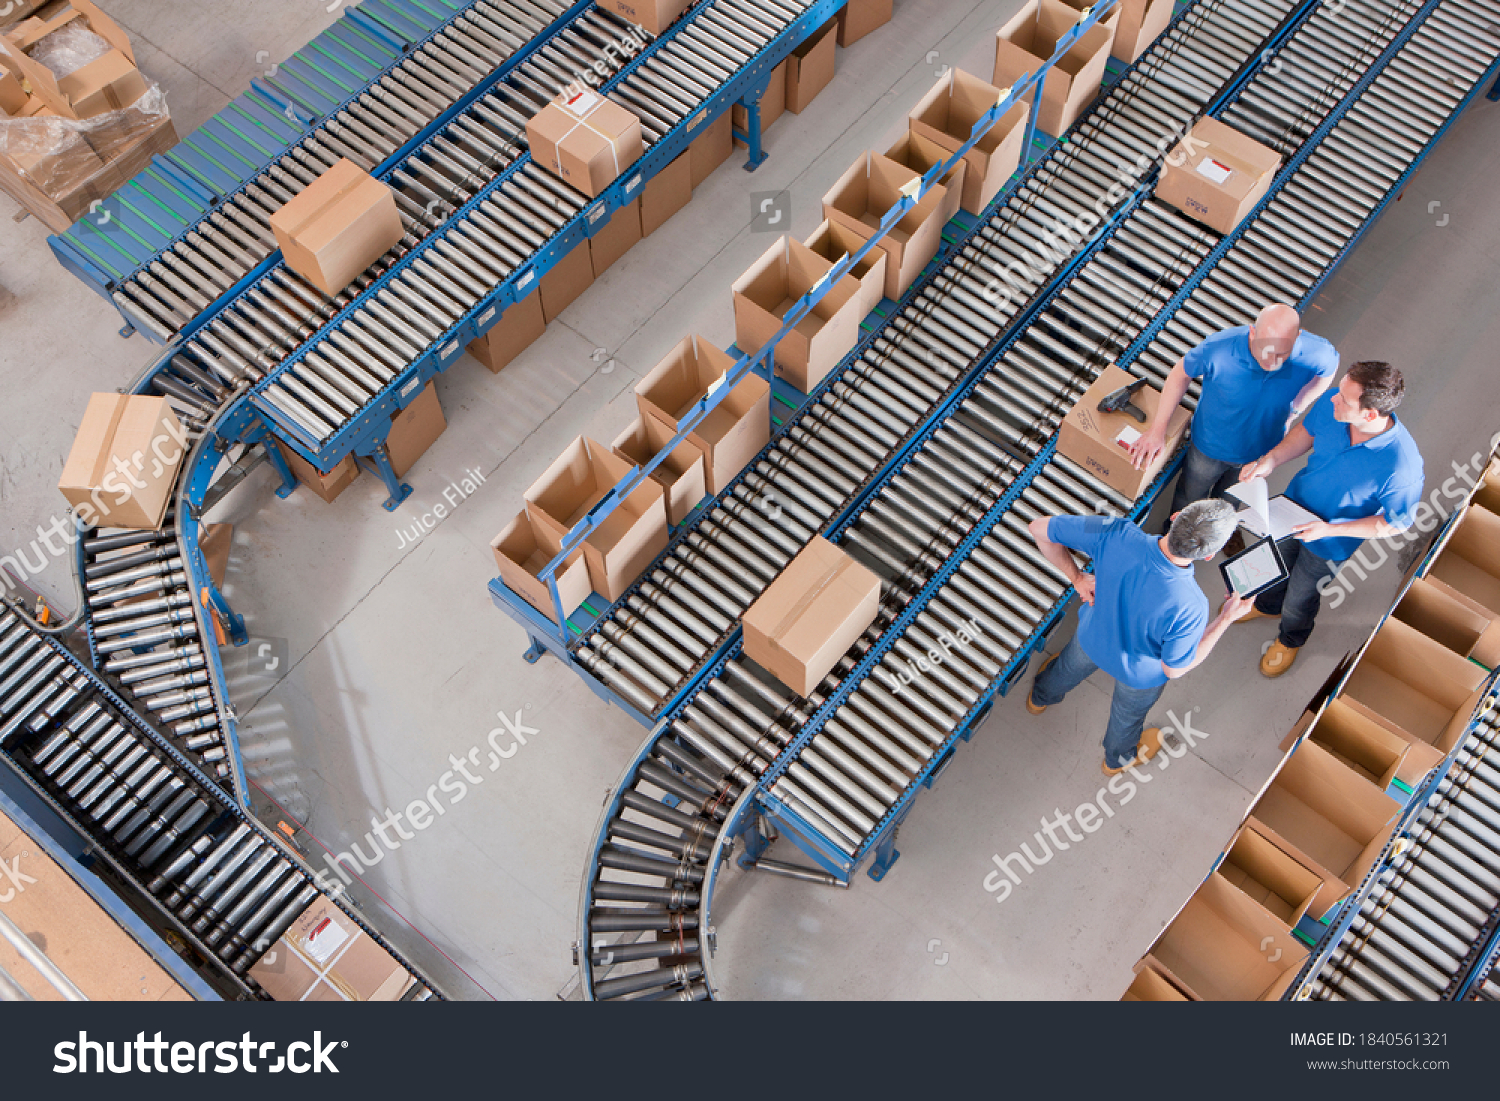 Top view of workers with papers and a digital tablet having a discussion among boxes laid on conveyor belts at a distribution warehouse. #1840561321